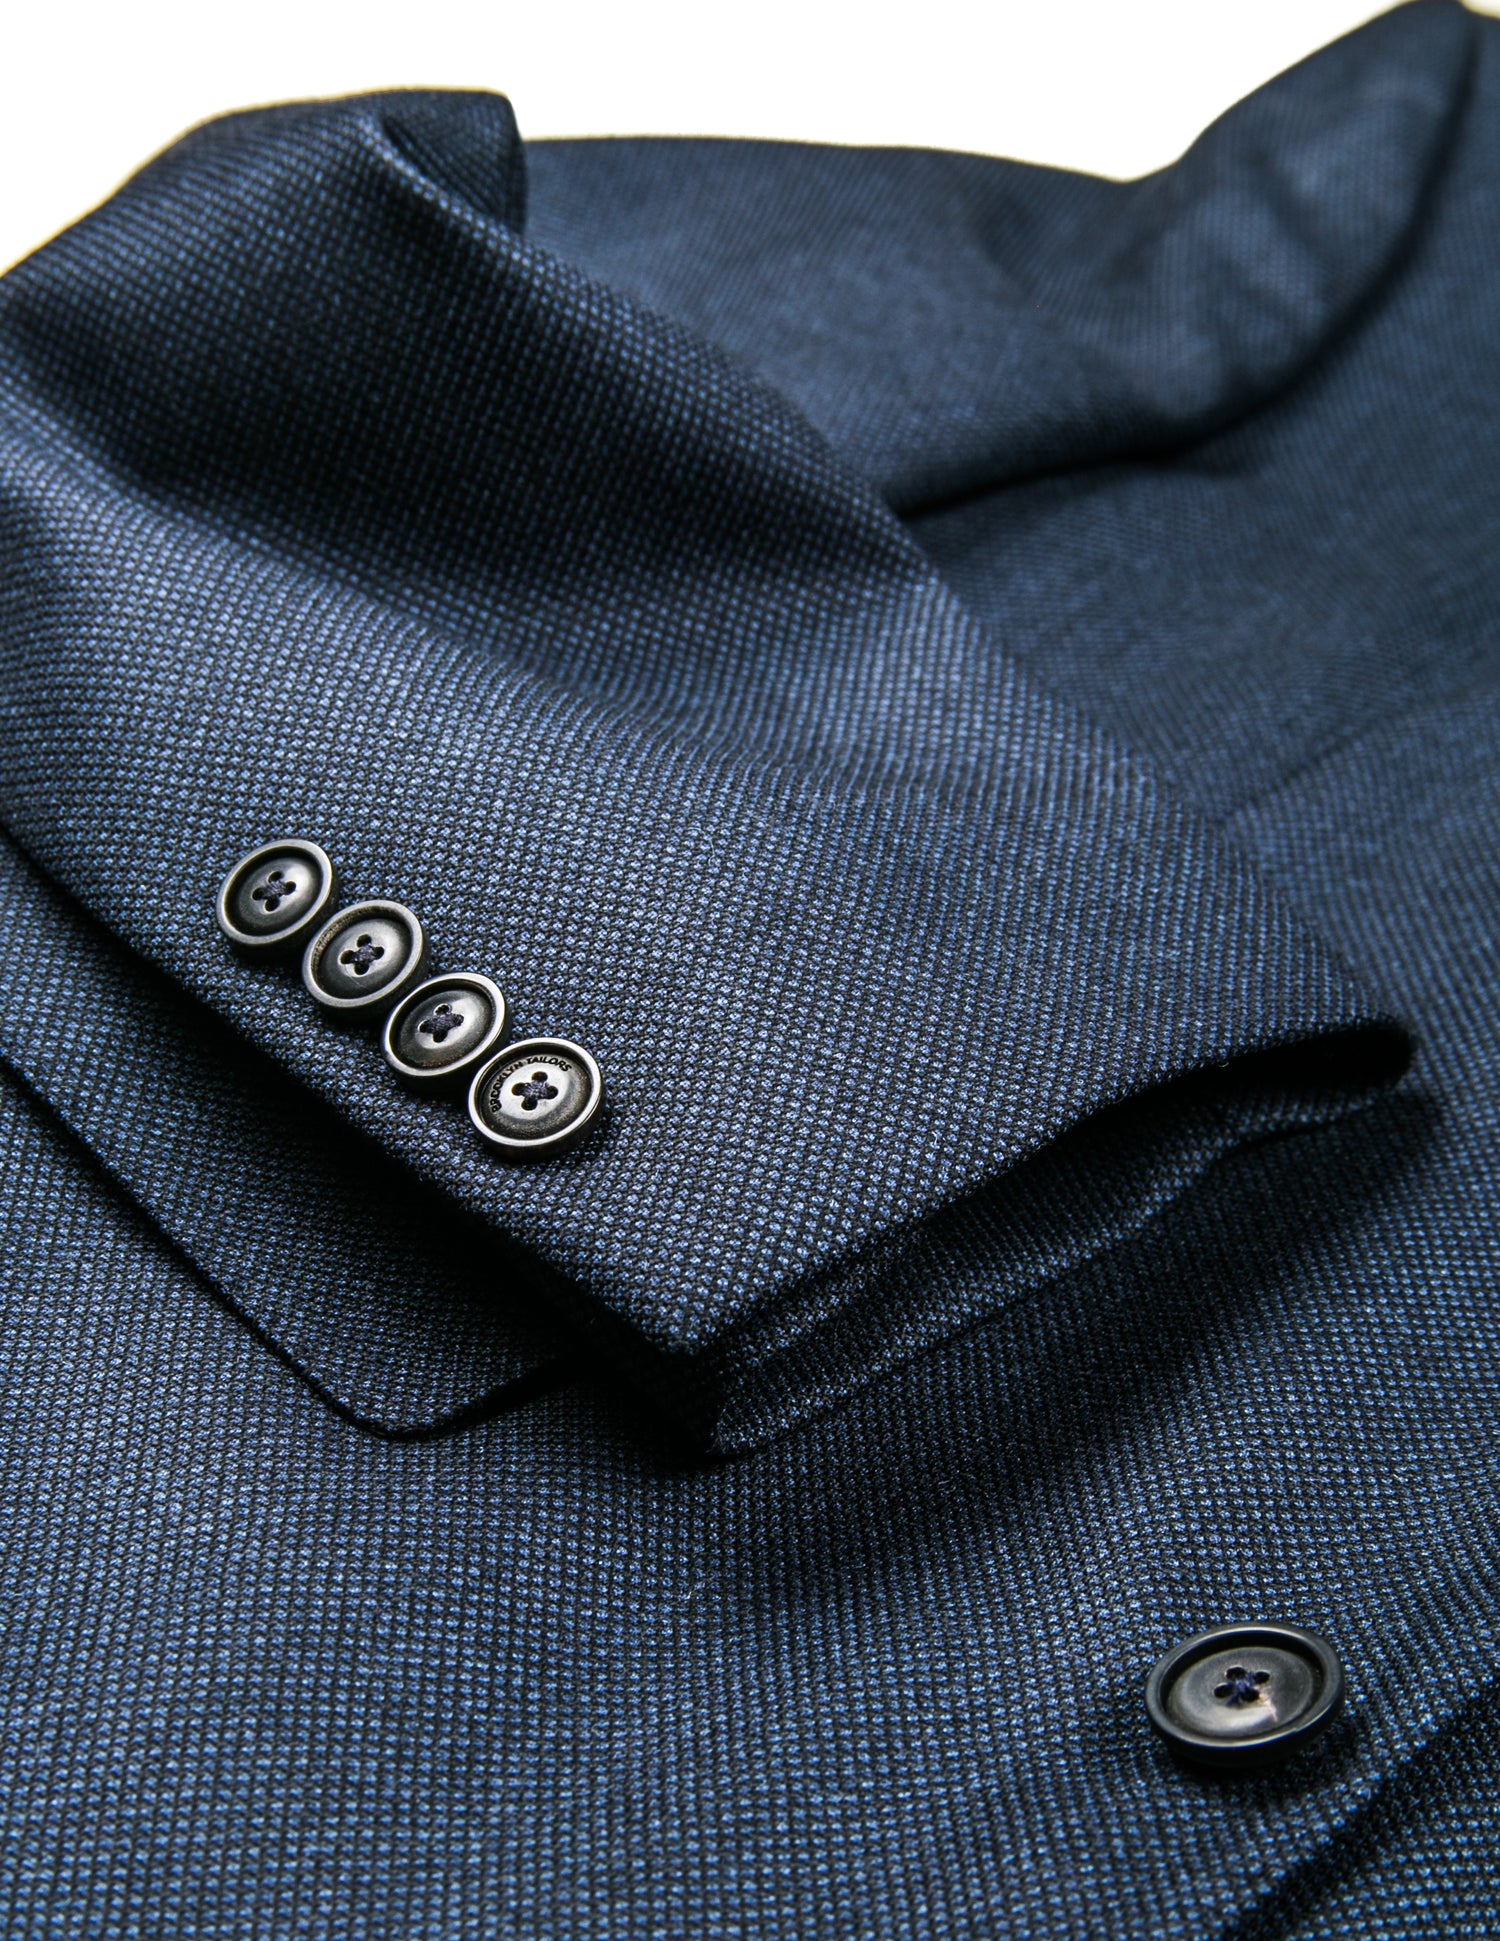 Detail of BKT50 Tailored Jacket in Birdseye Weave - Navy showing cuff and fabric texture